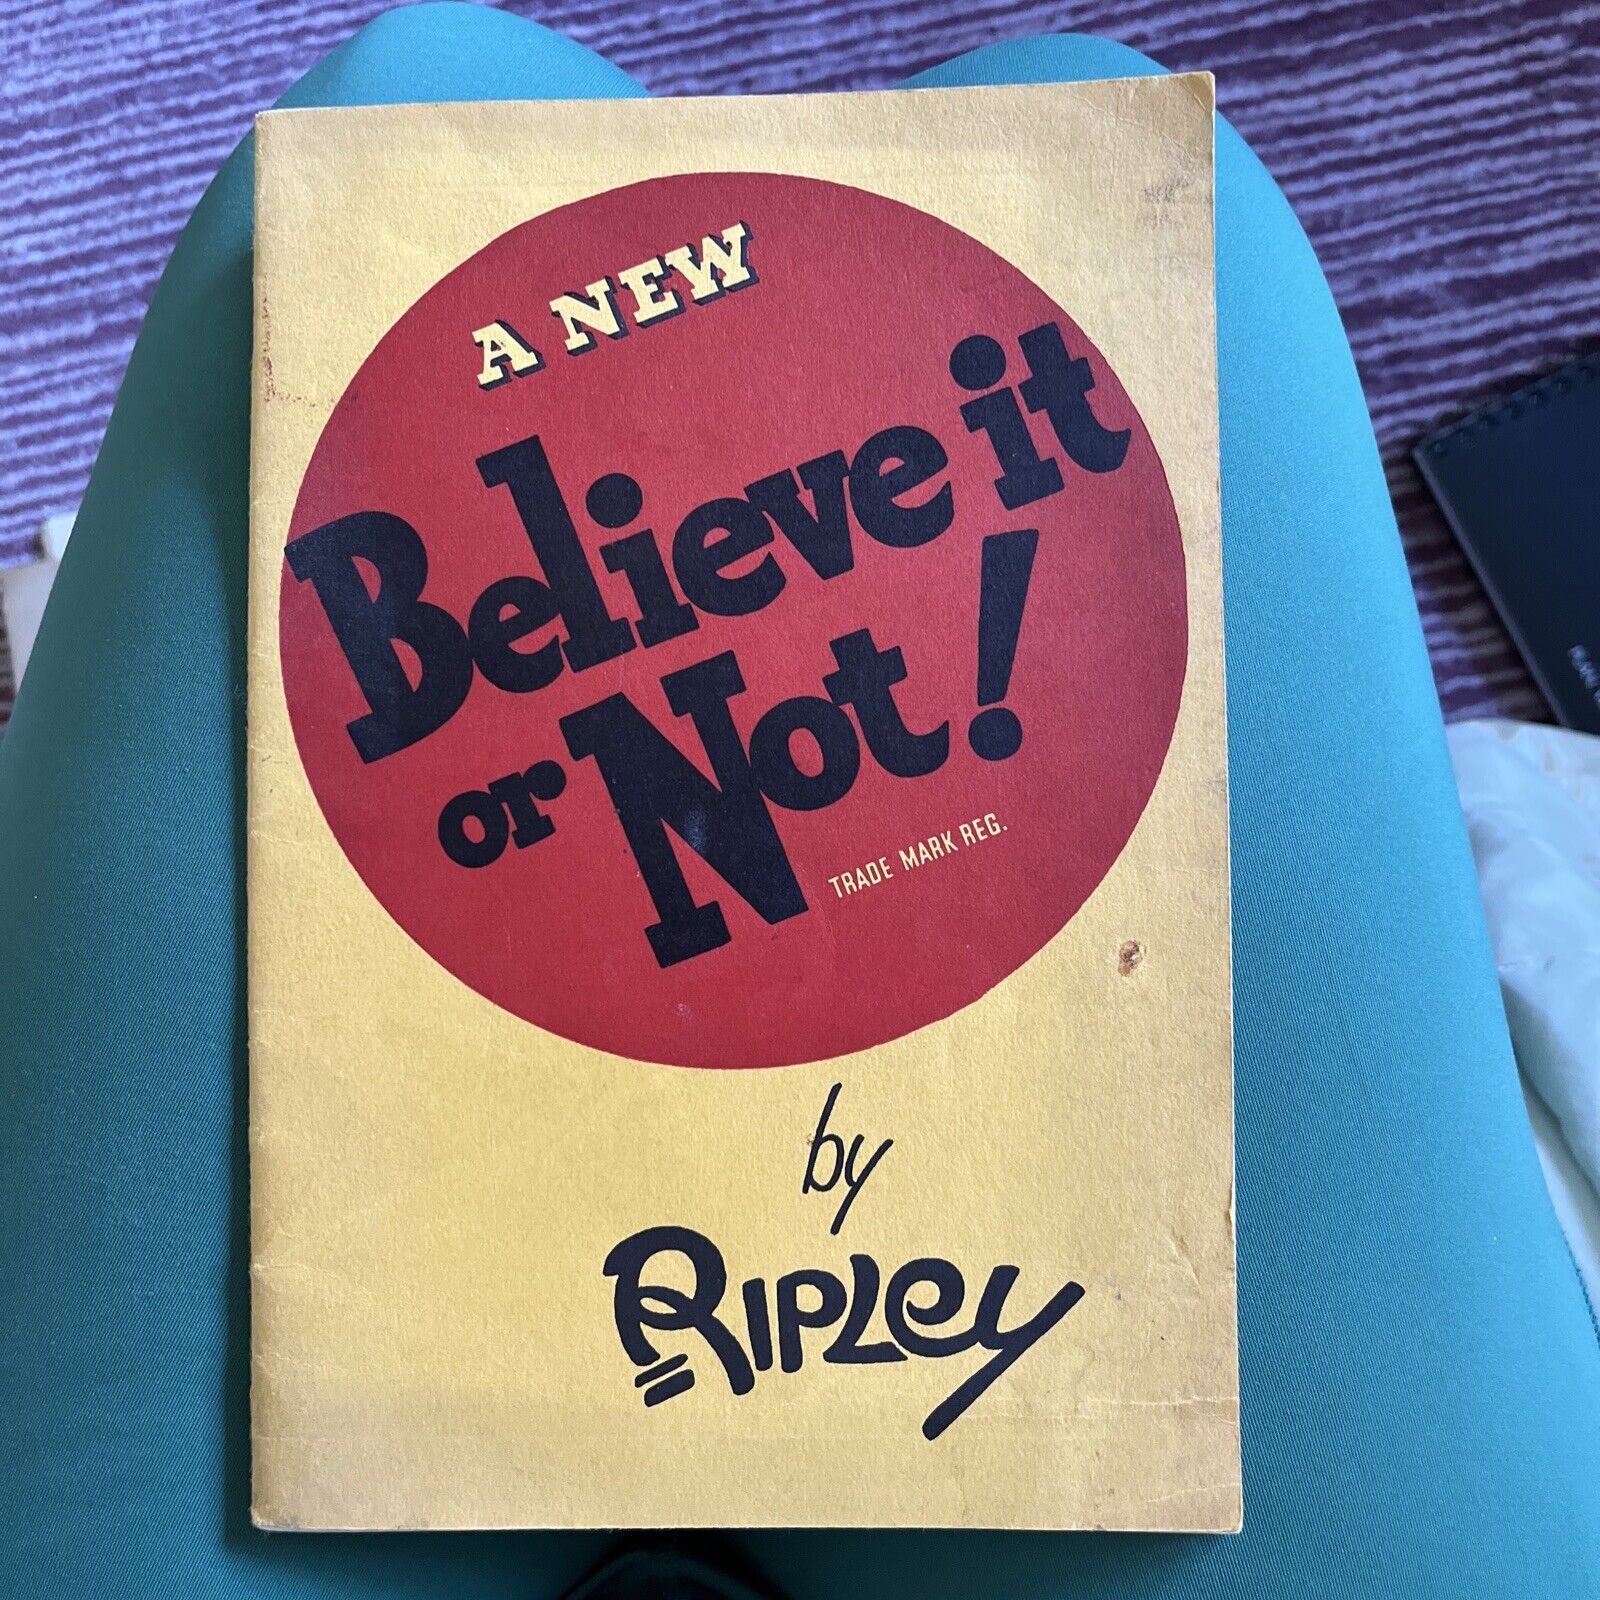 Vintage Original Book: 1930's a New BELIEVE IT OR NOT by RIPLEY Good, 32pgs